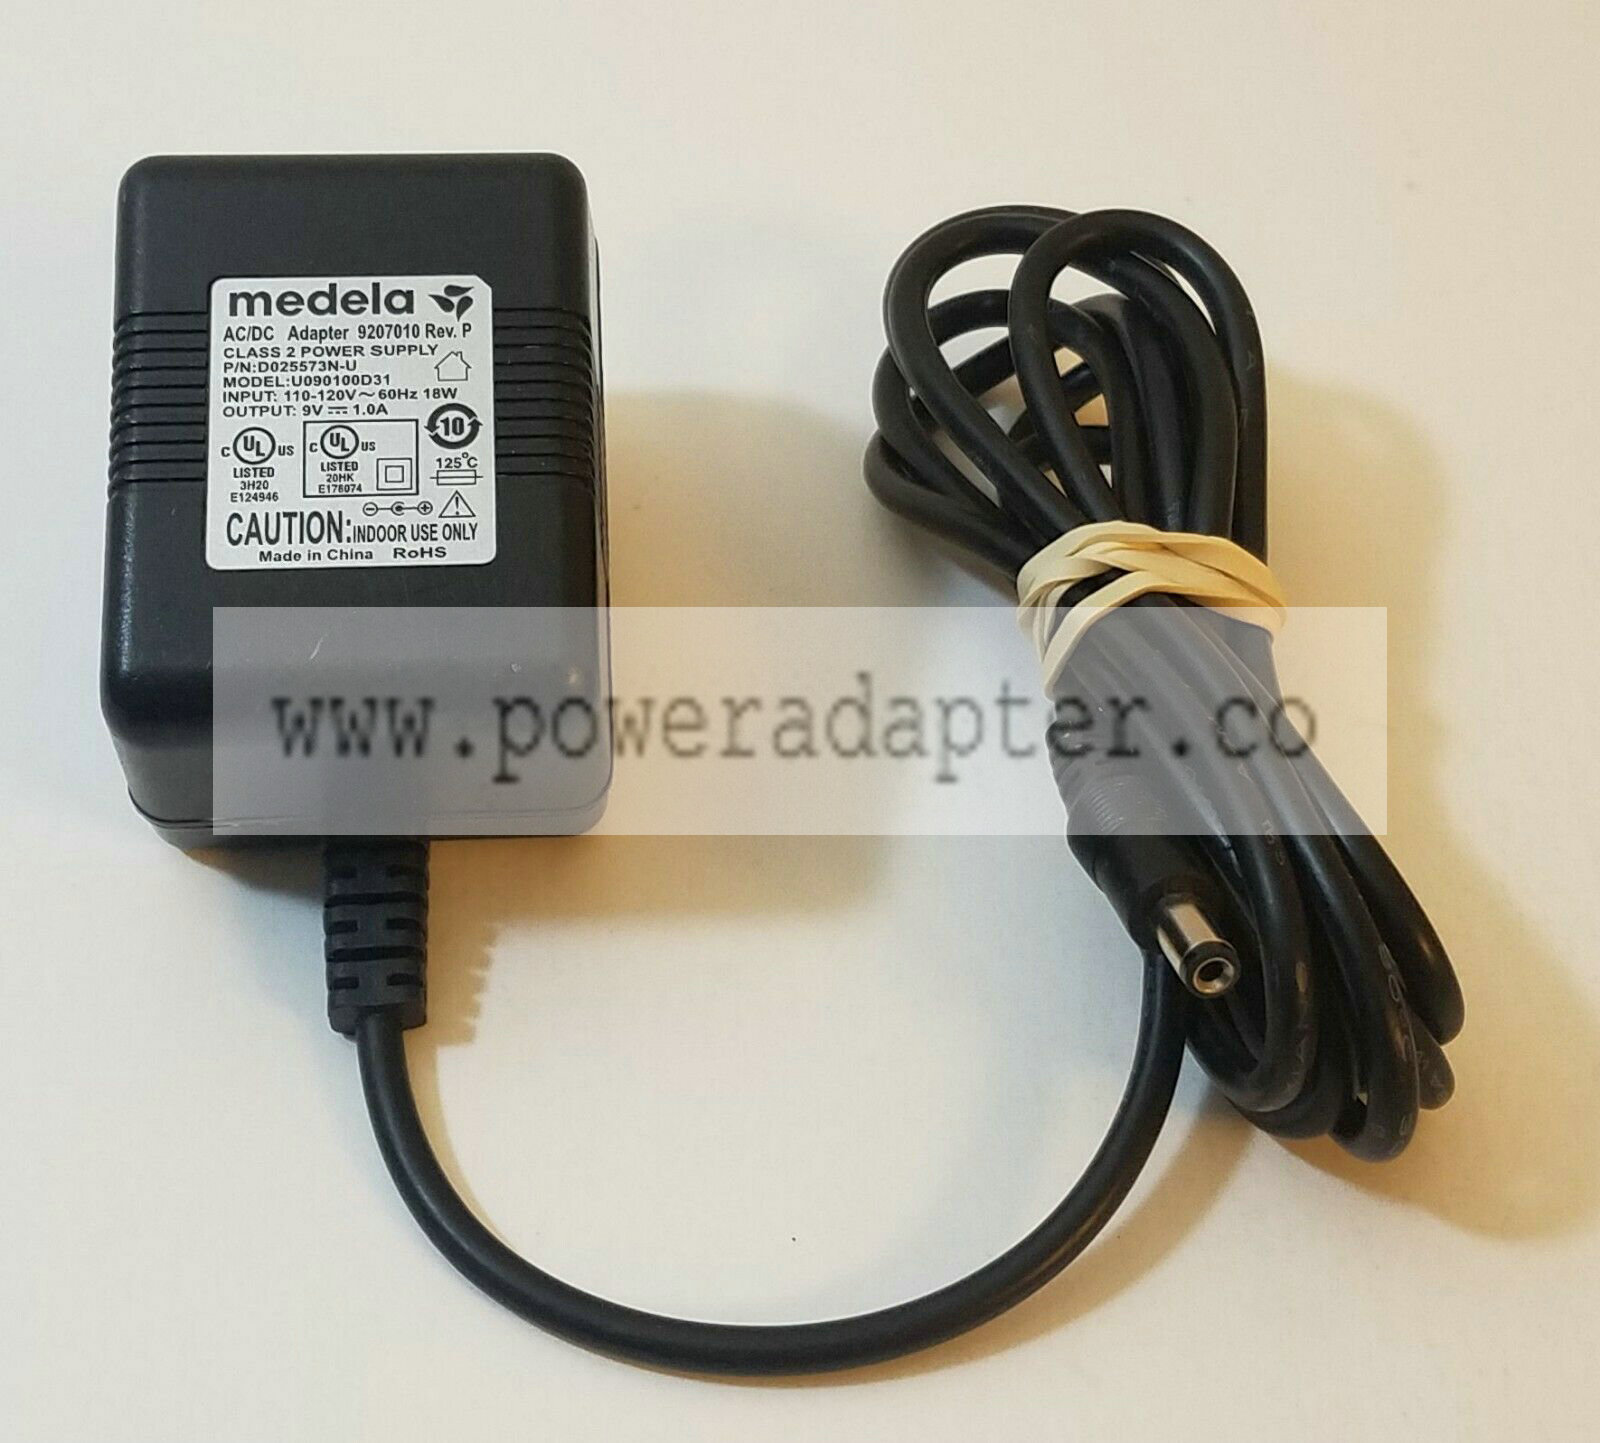 Genuine Medela U090100D31 AC Adapter Power Supply 920.7010 9V 1.0A Breast Pump Type: AC/DC Adapter Output Voltage: 9